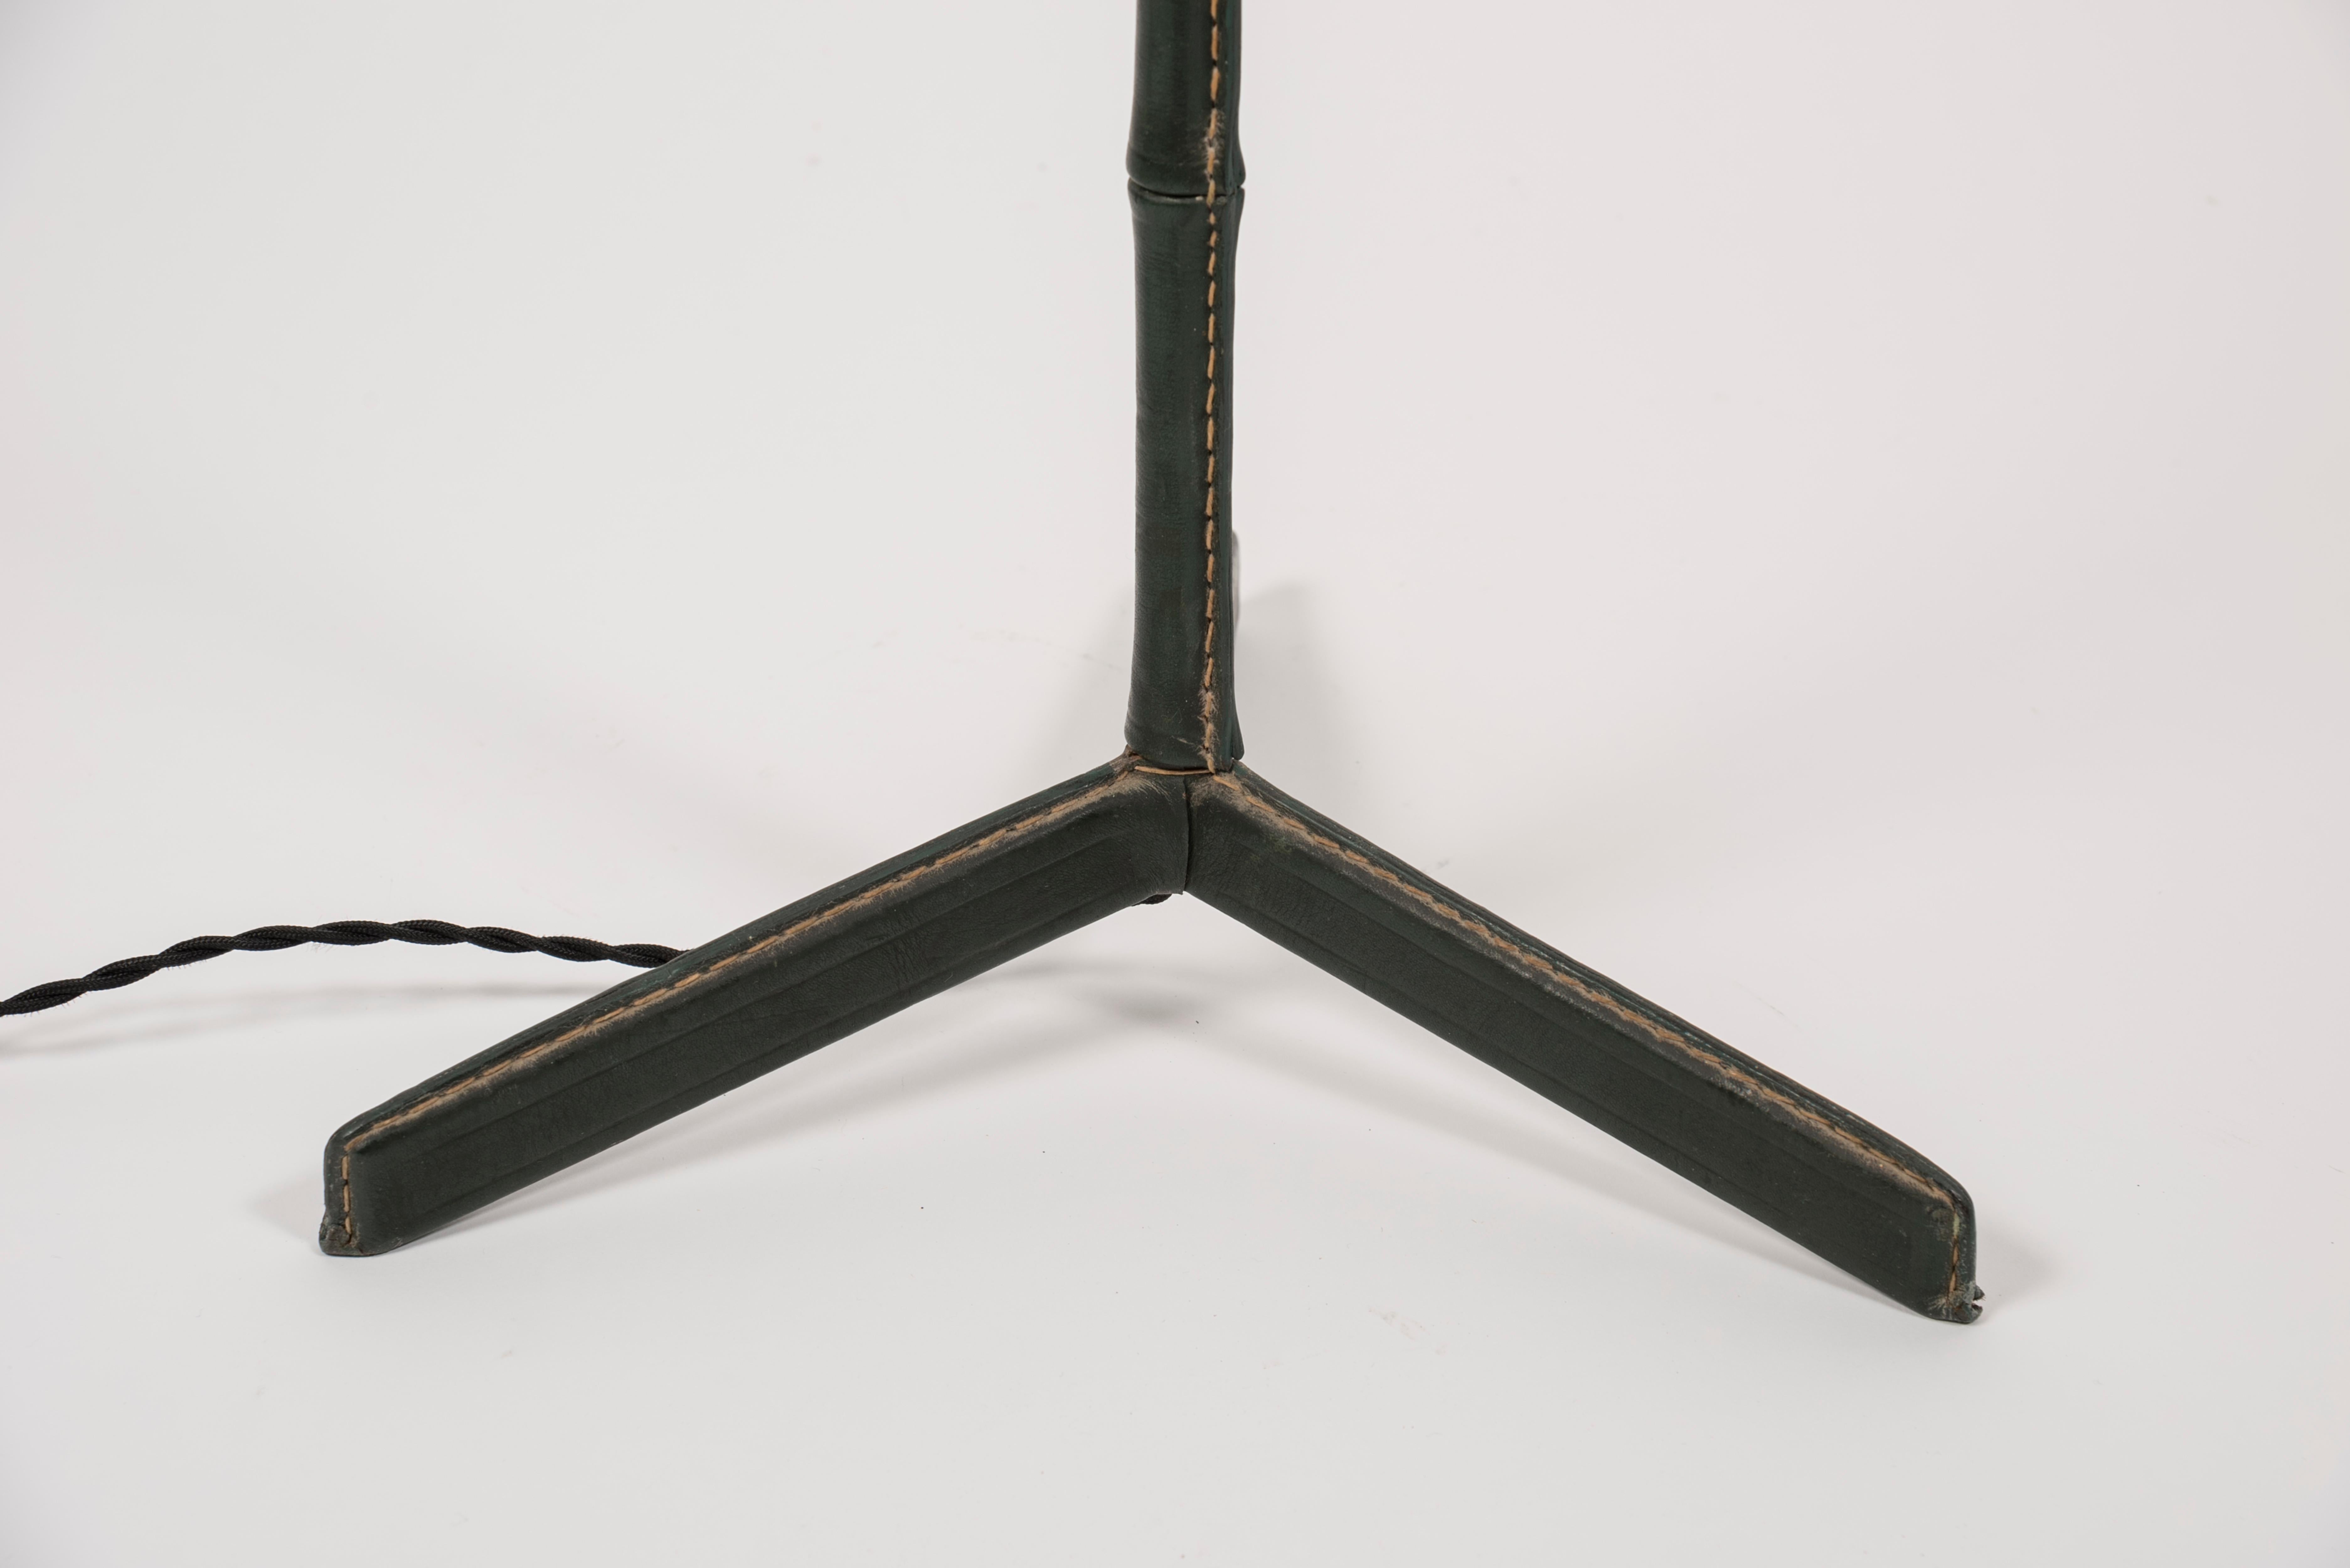 1950's Dark green stitched leather floor lamp By Jacques Adnet.
No shade provided
Shade not included
France.